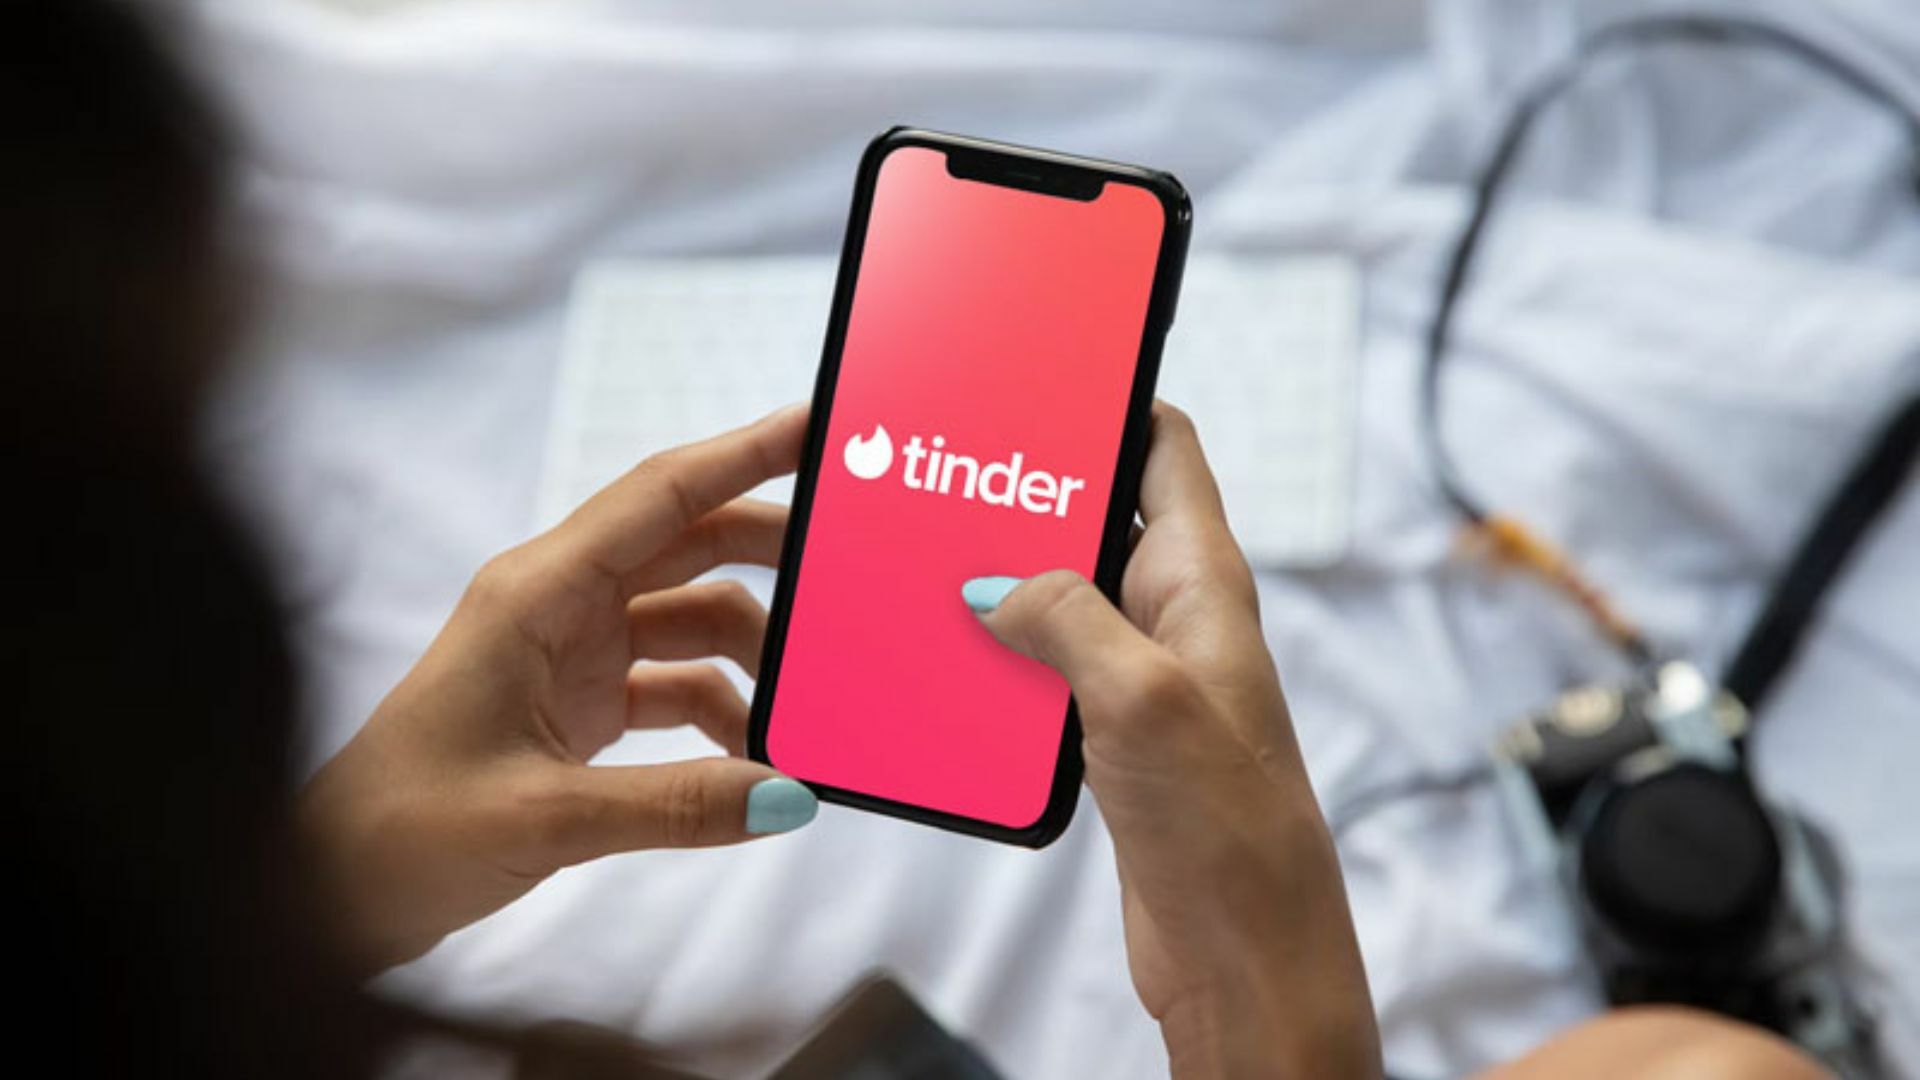 A person holding a phone showing the Tinder logo.